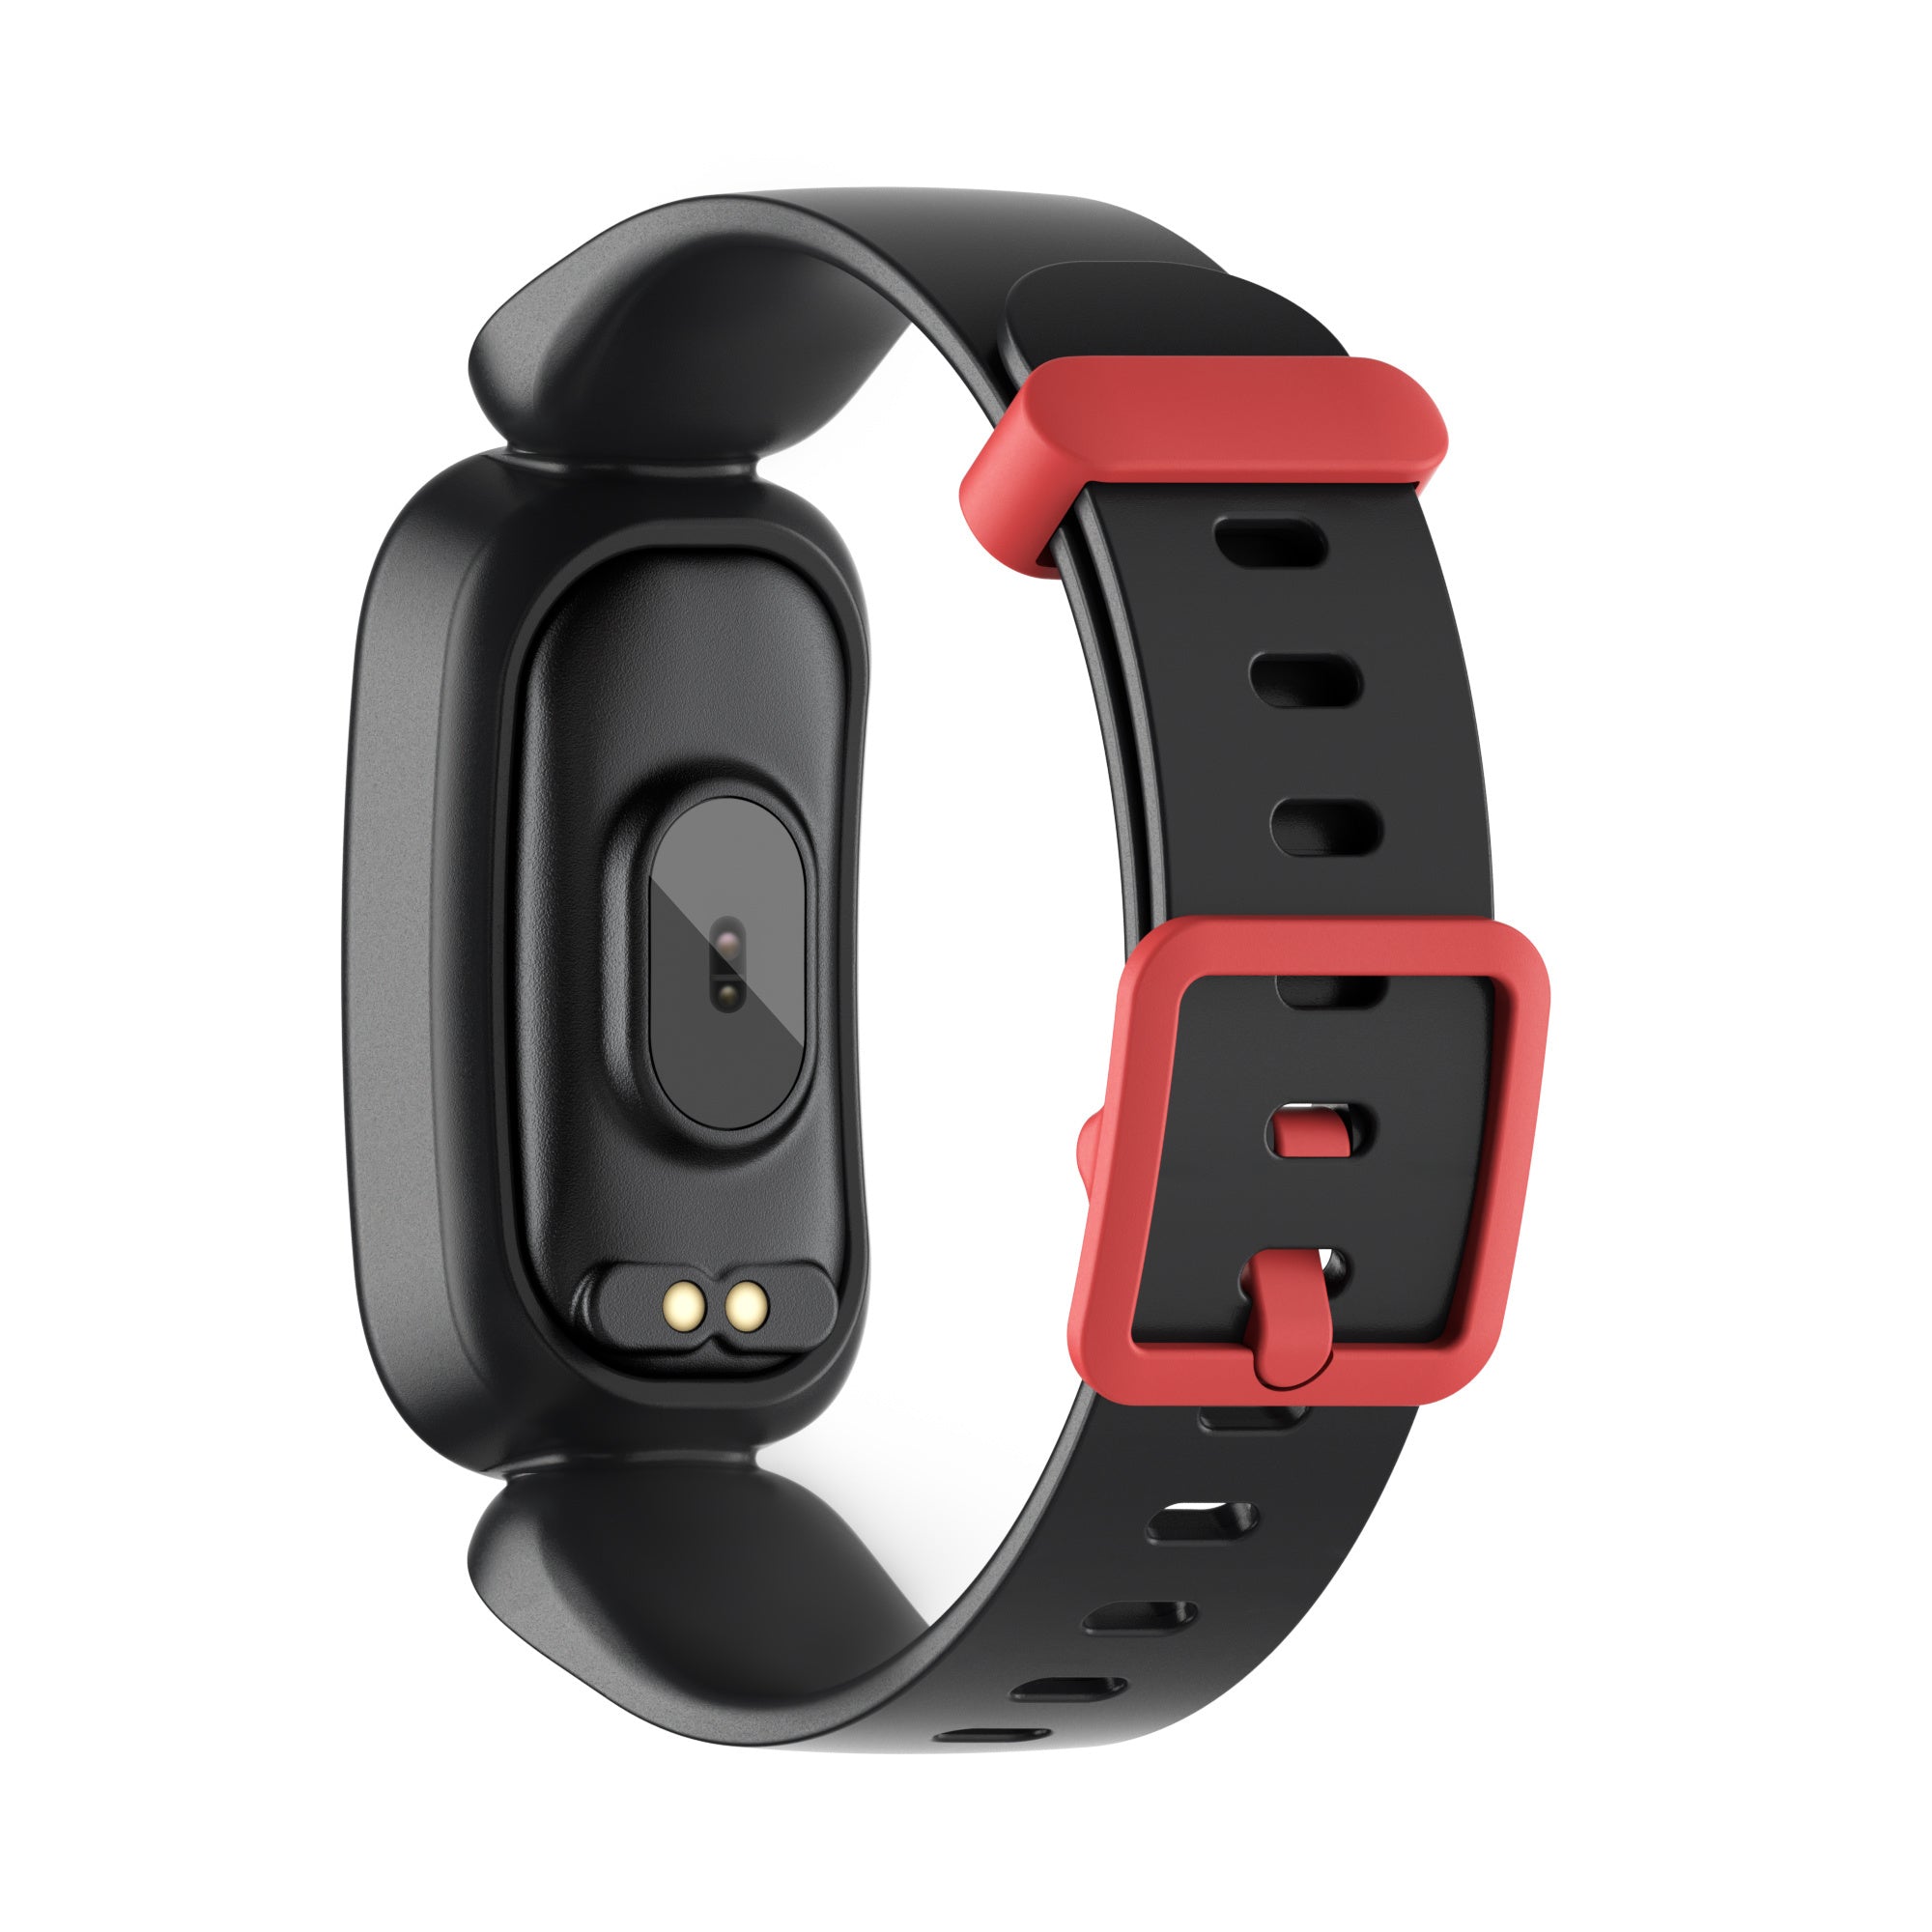 Waterproof fitness bracelet with activity tracking and GPS functions - Red